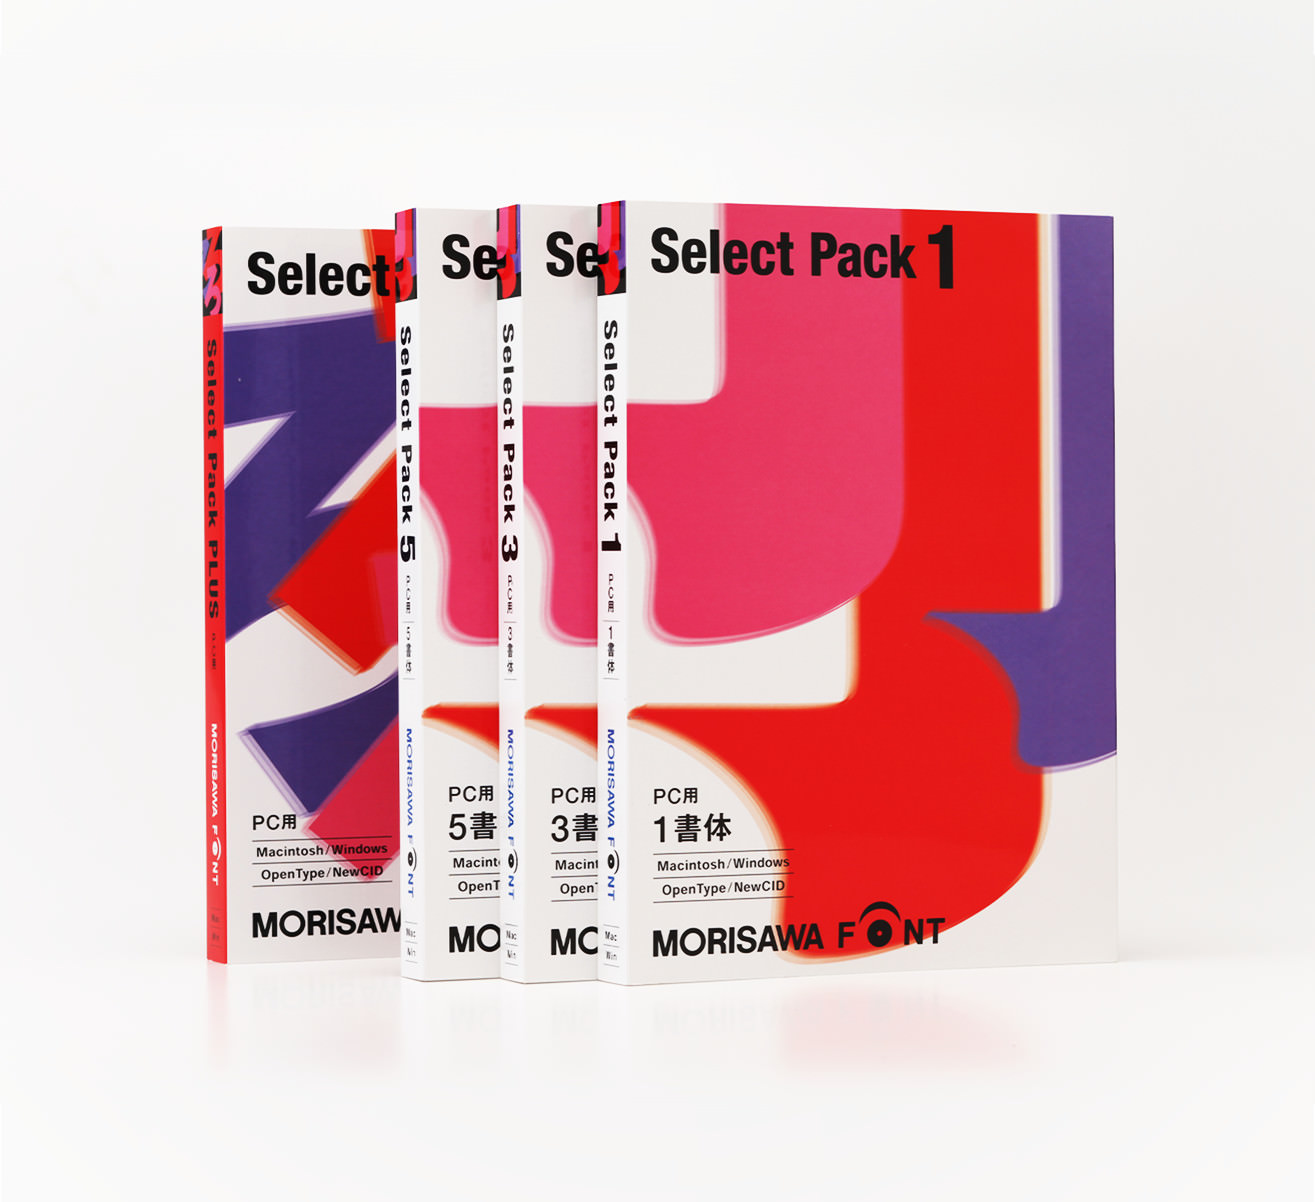 Select Pack